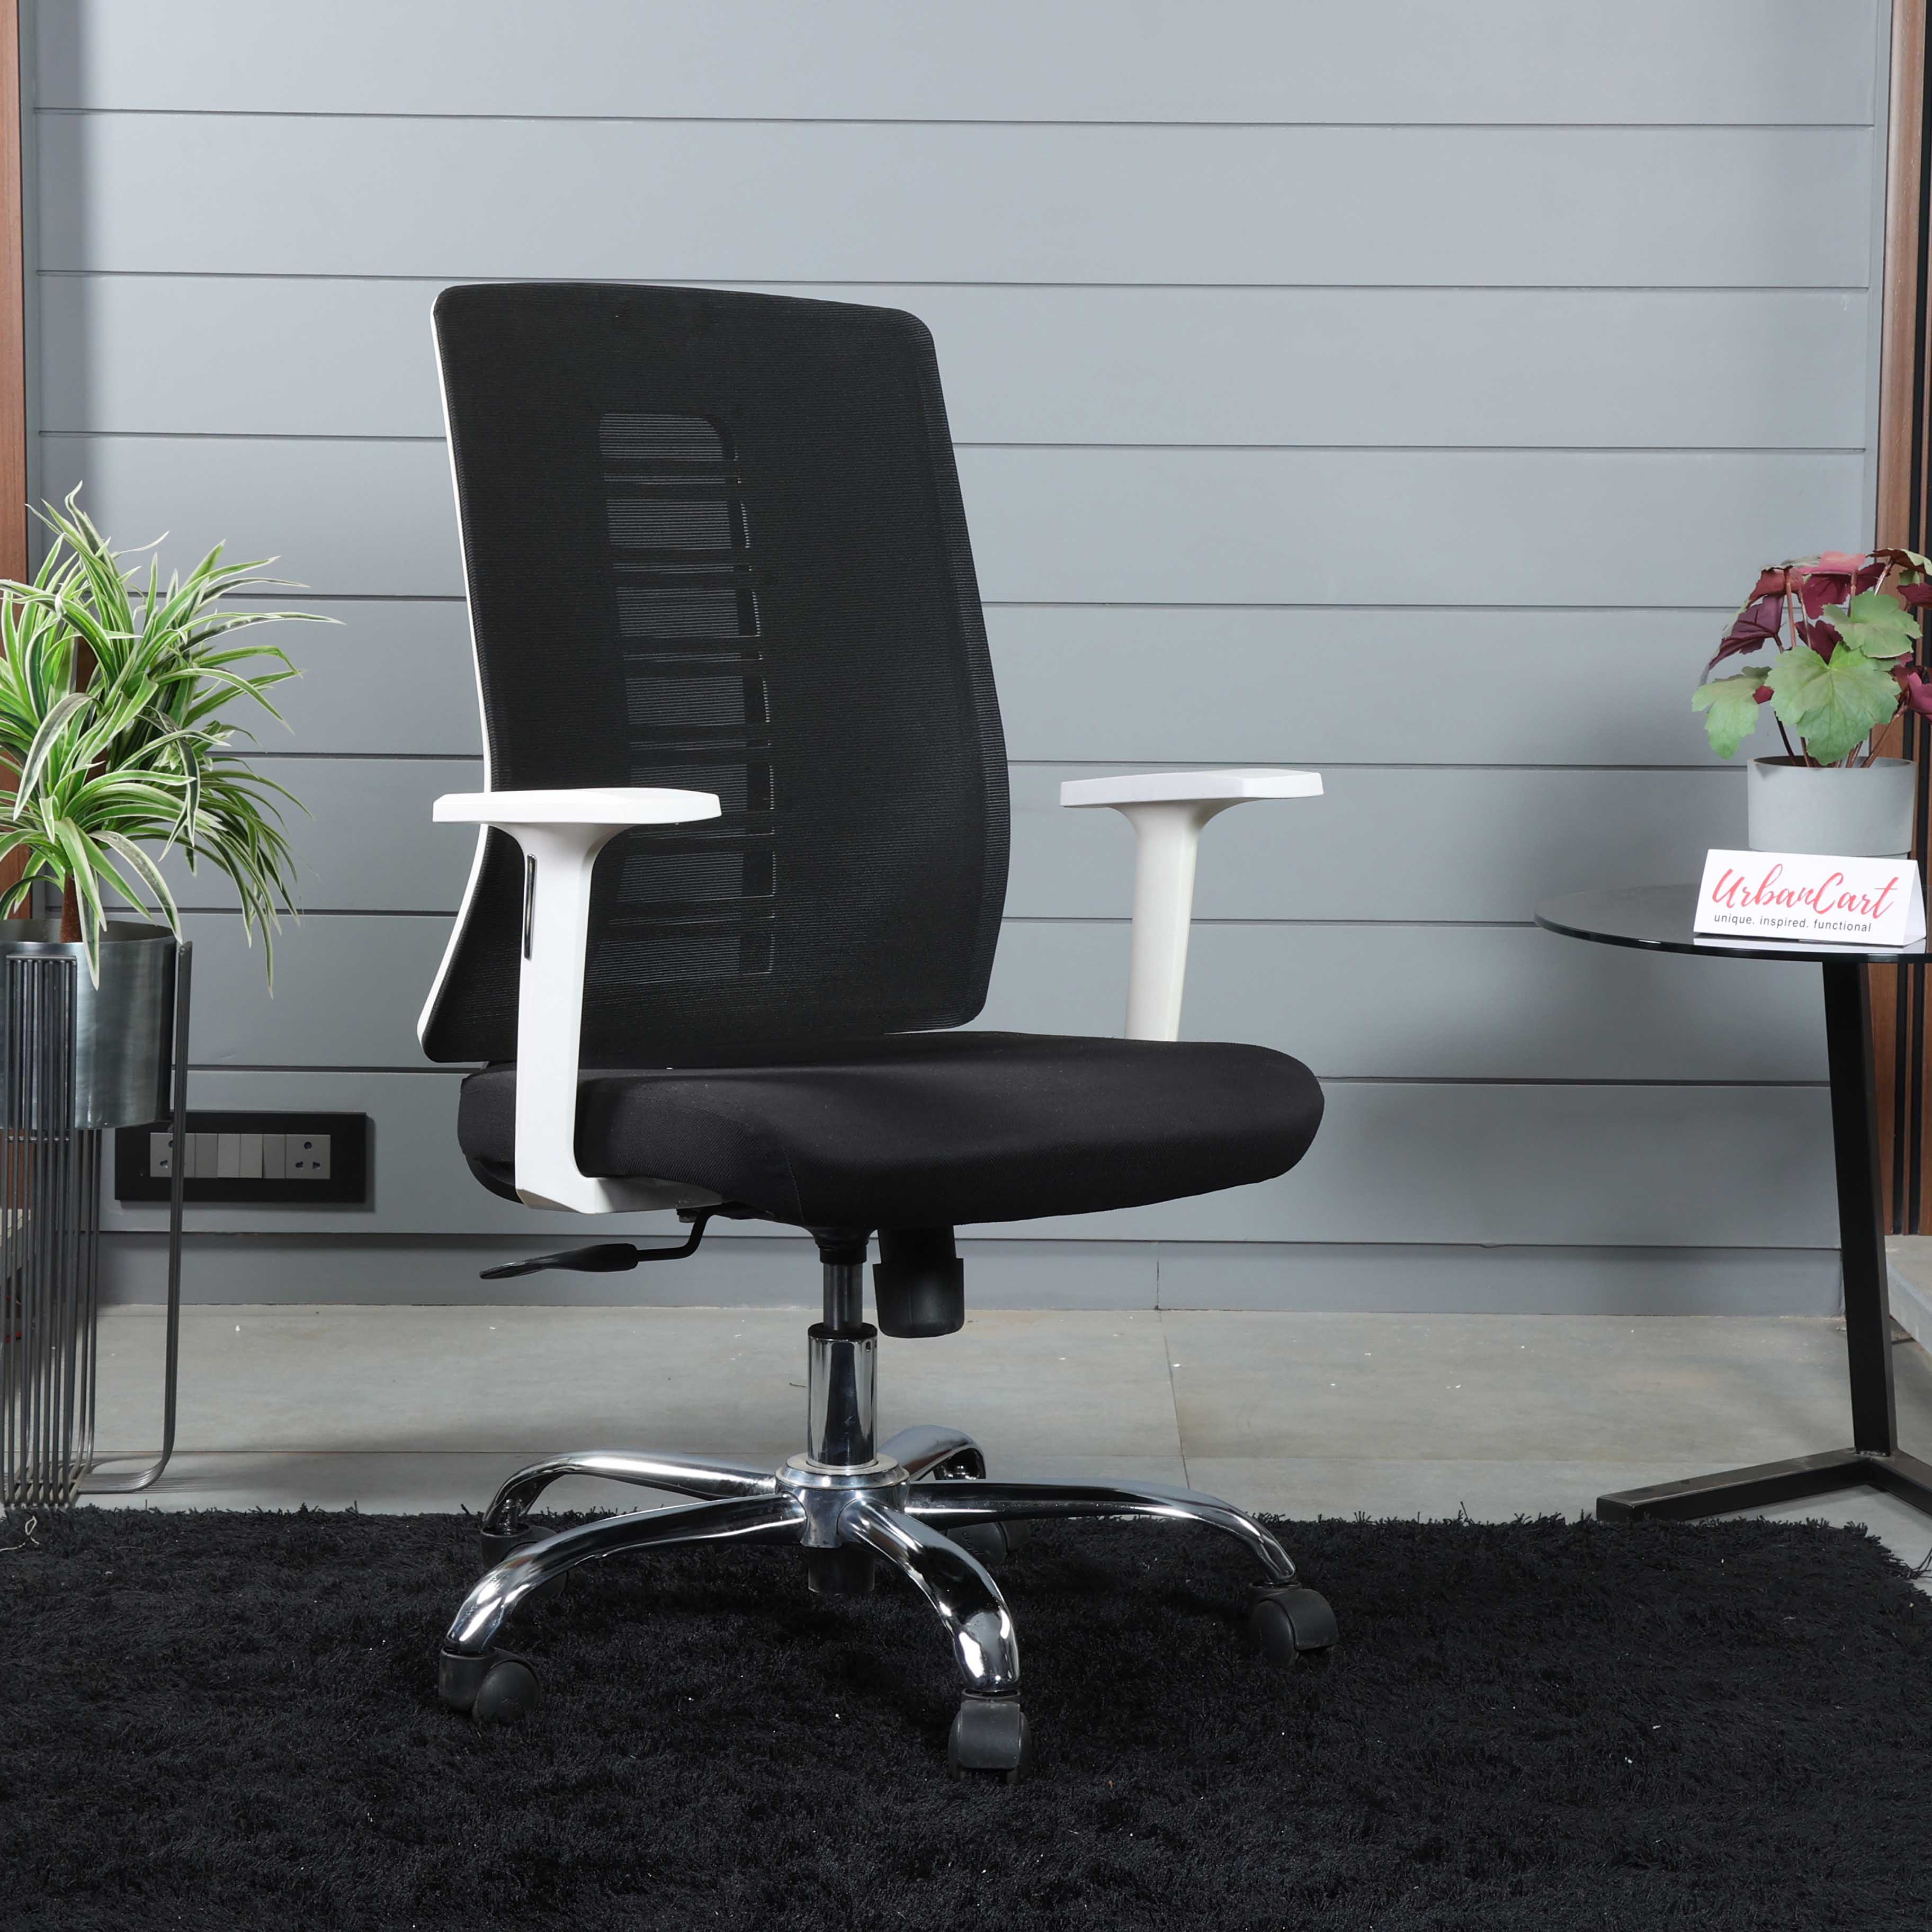 Logan Swivel Workstation Chair with Arm Rest and Chrome Base Chair urbancart